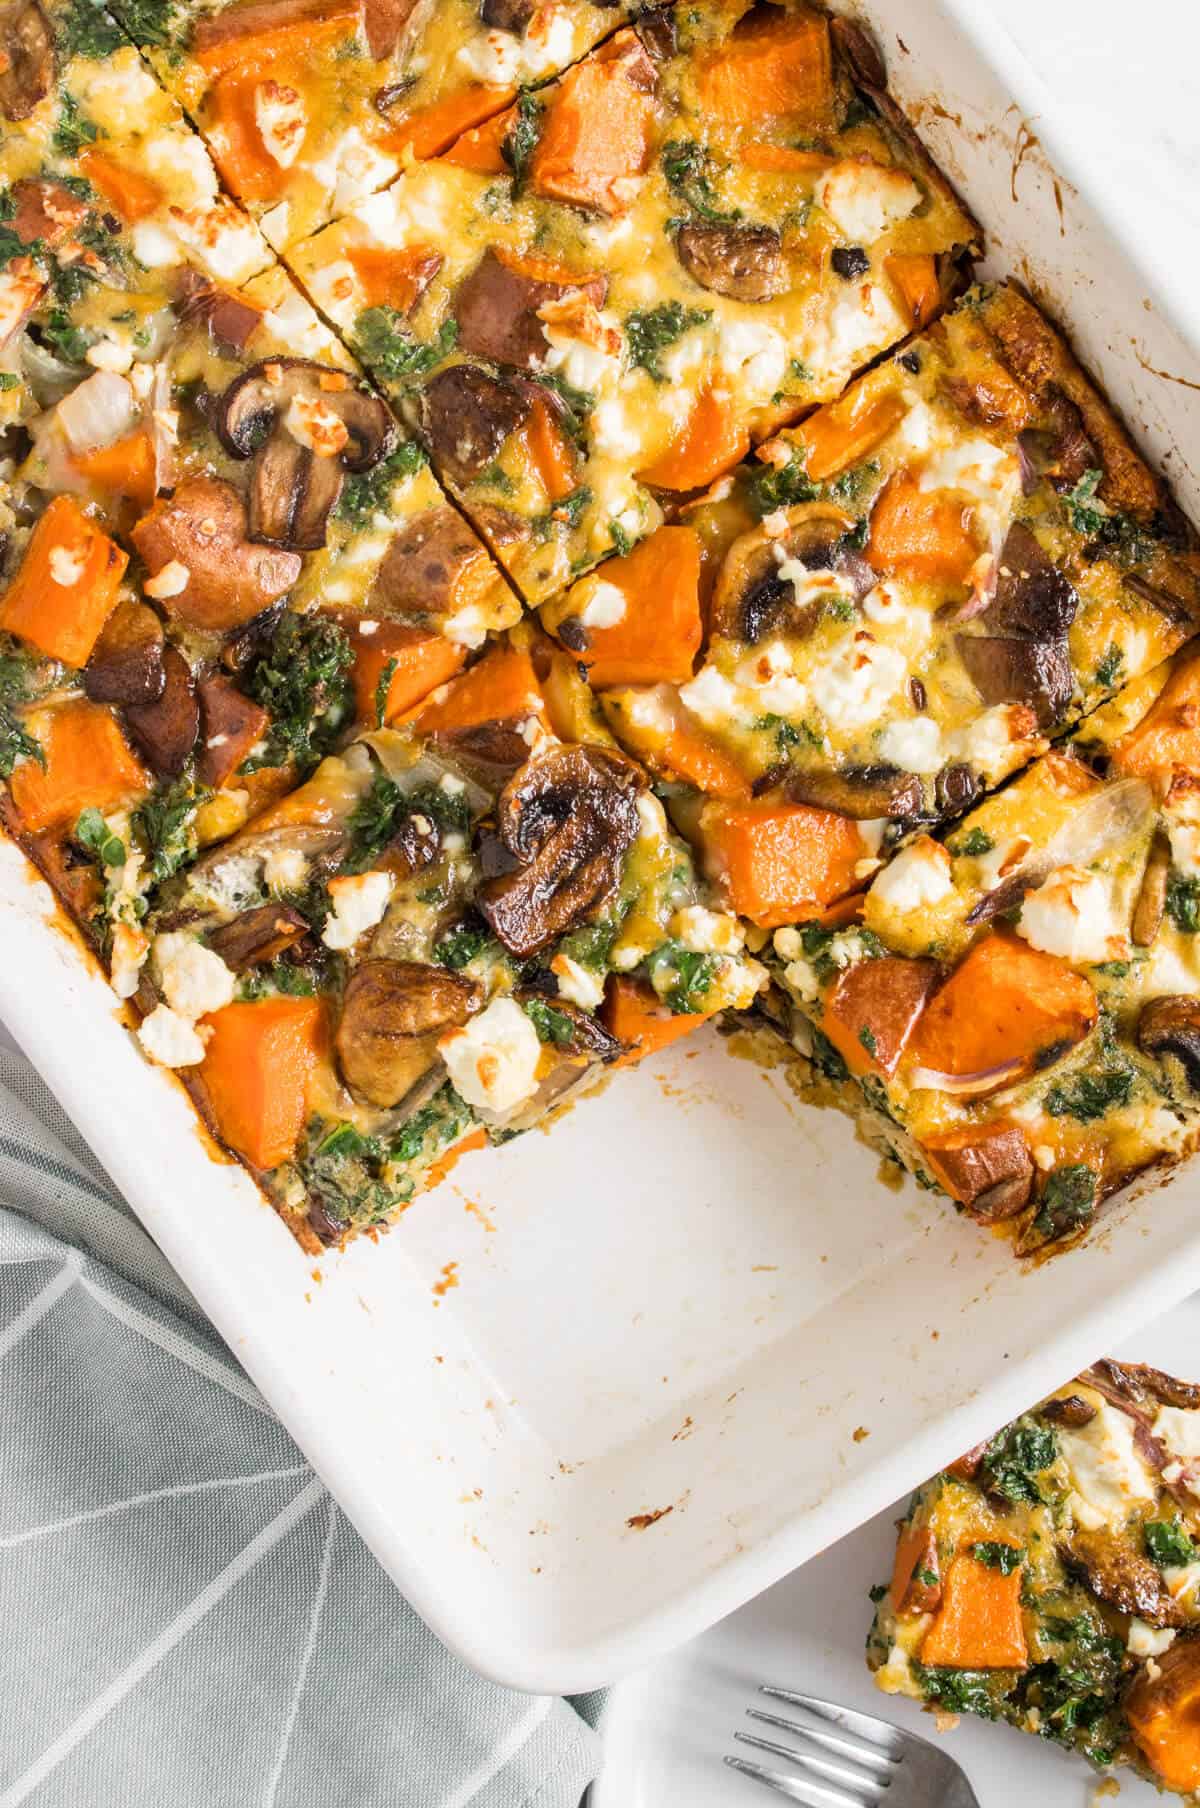 https://cookingwithayeh.com/wp-content/uploads/2020/12/Vegetable-Frittata-1.jpg